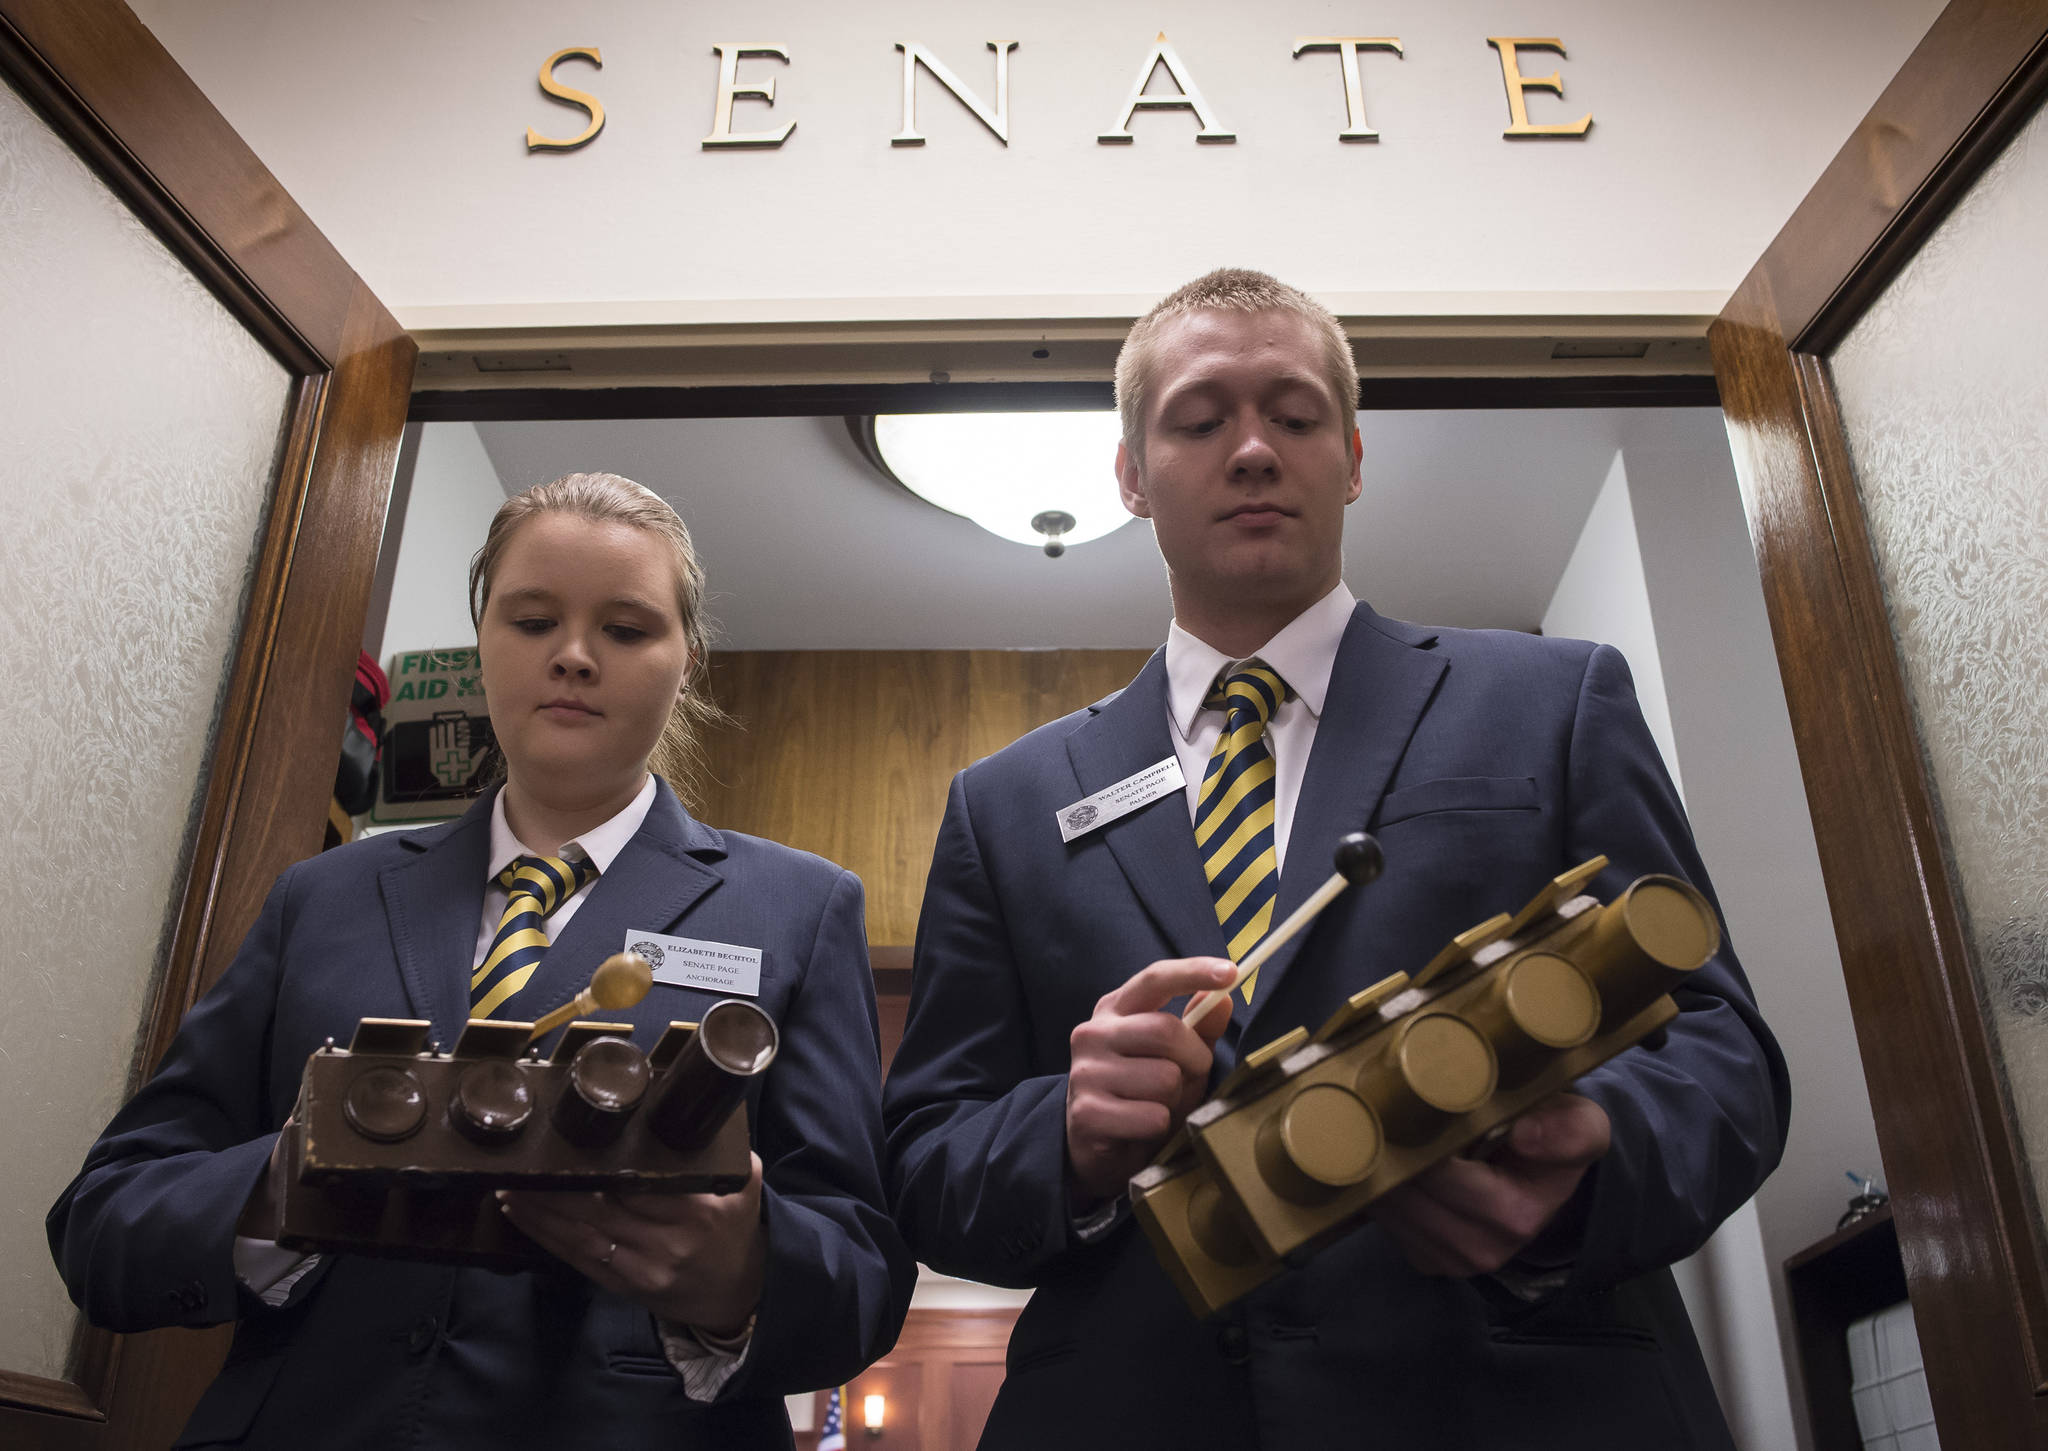 Senate Pages Elizabeth Bechtol, of Anchorage, and Walter Campbell, of Palmer, play glockenspiels to announce the meeting of the Senate as legislators return to Alaska’s Capitol to open the Second Session of the 30th Legislature on Tuesday, Jan. 16, 2018. (Michael Penn | Juneau Empire)